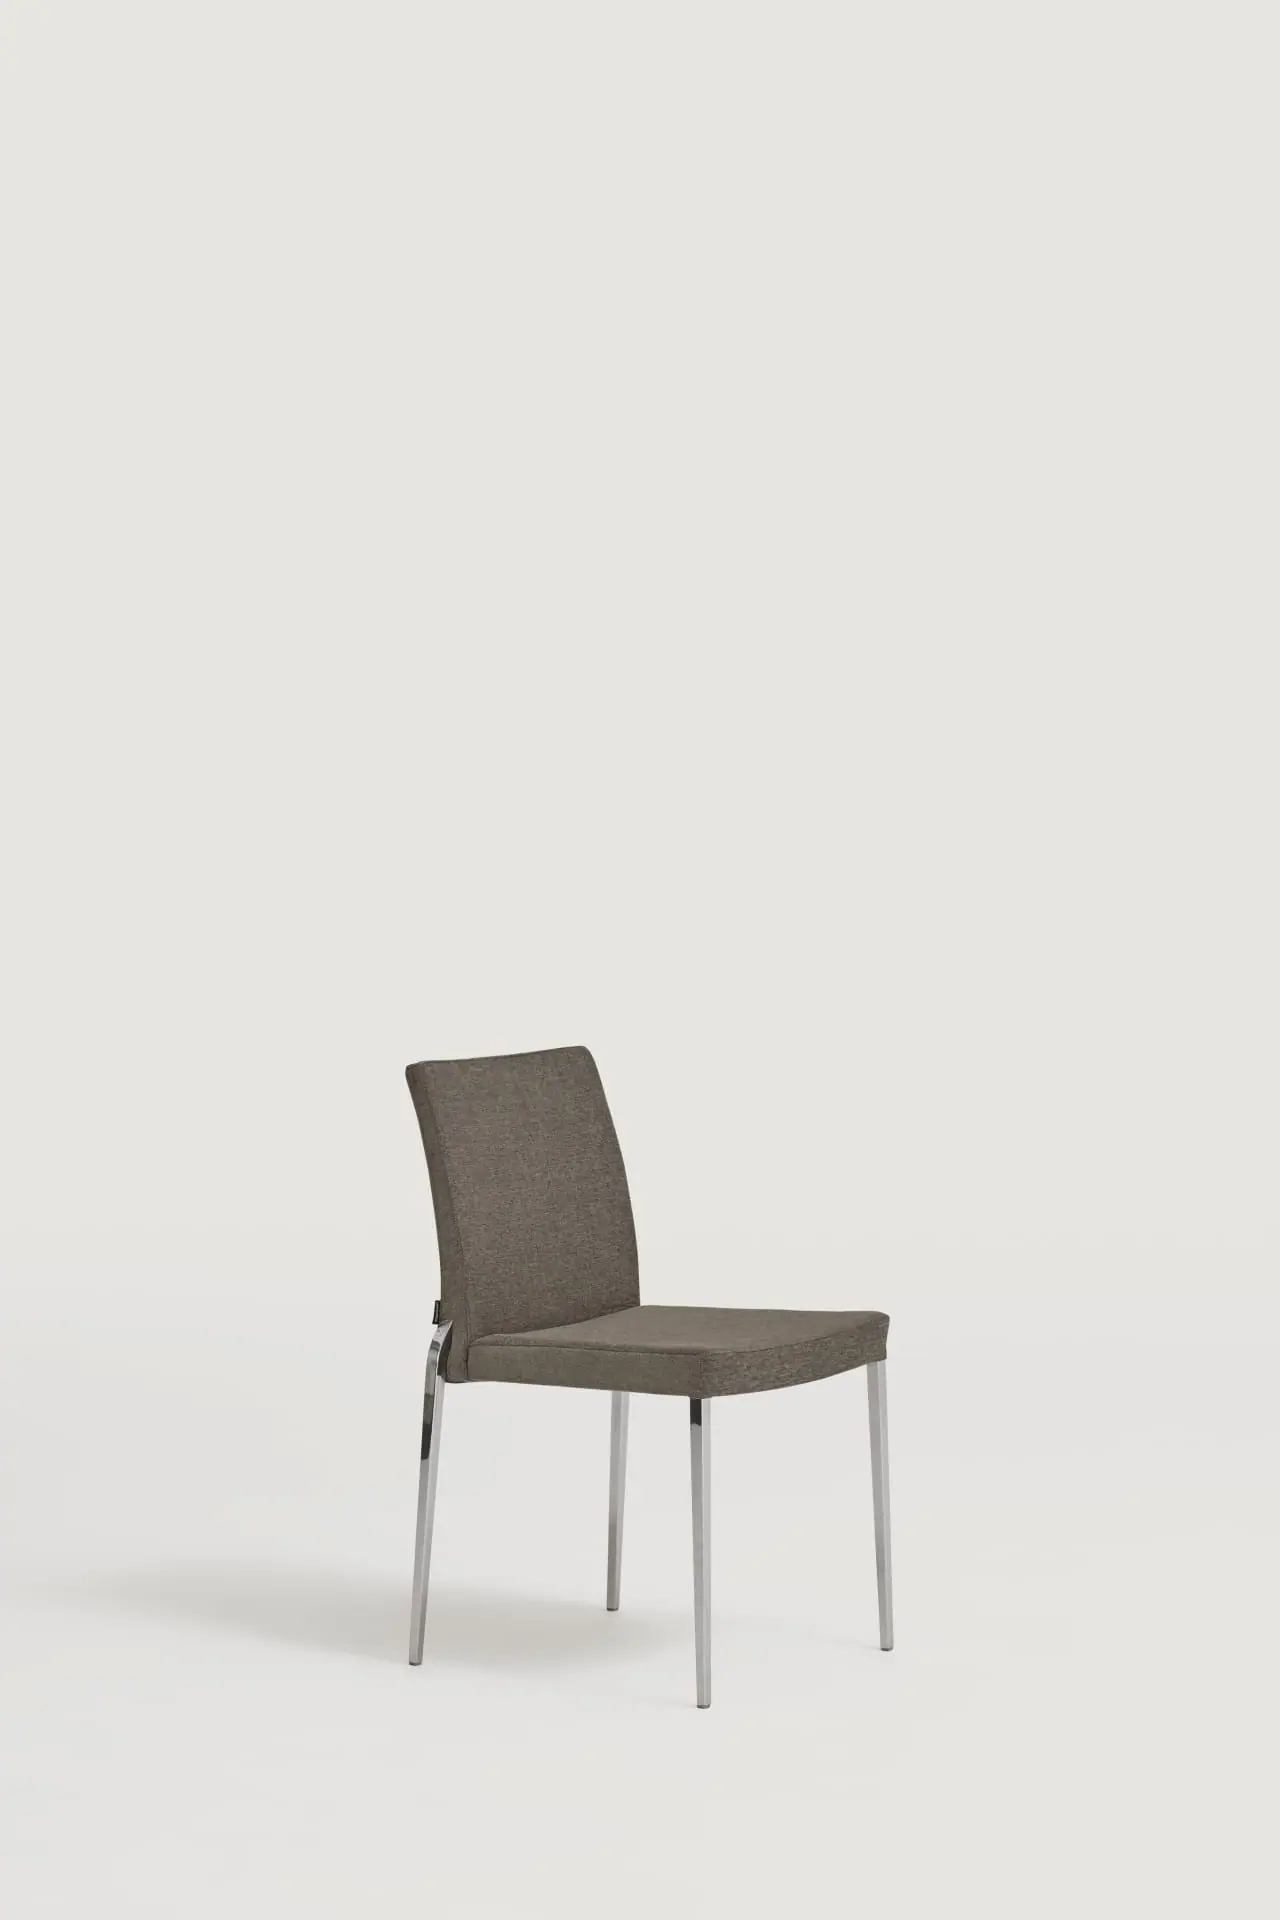 capdell-flick-chair-03